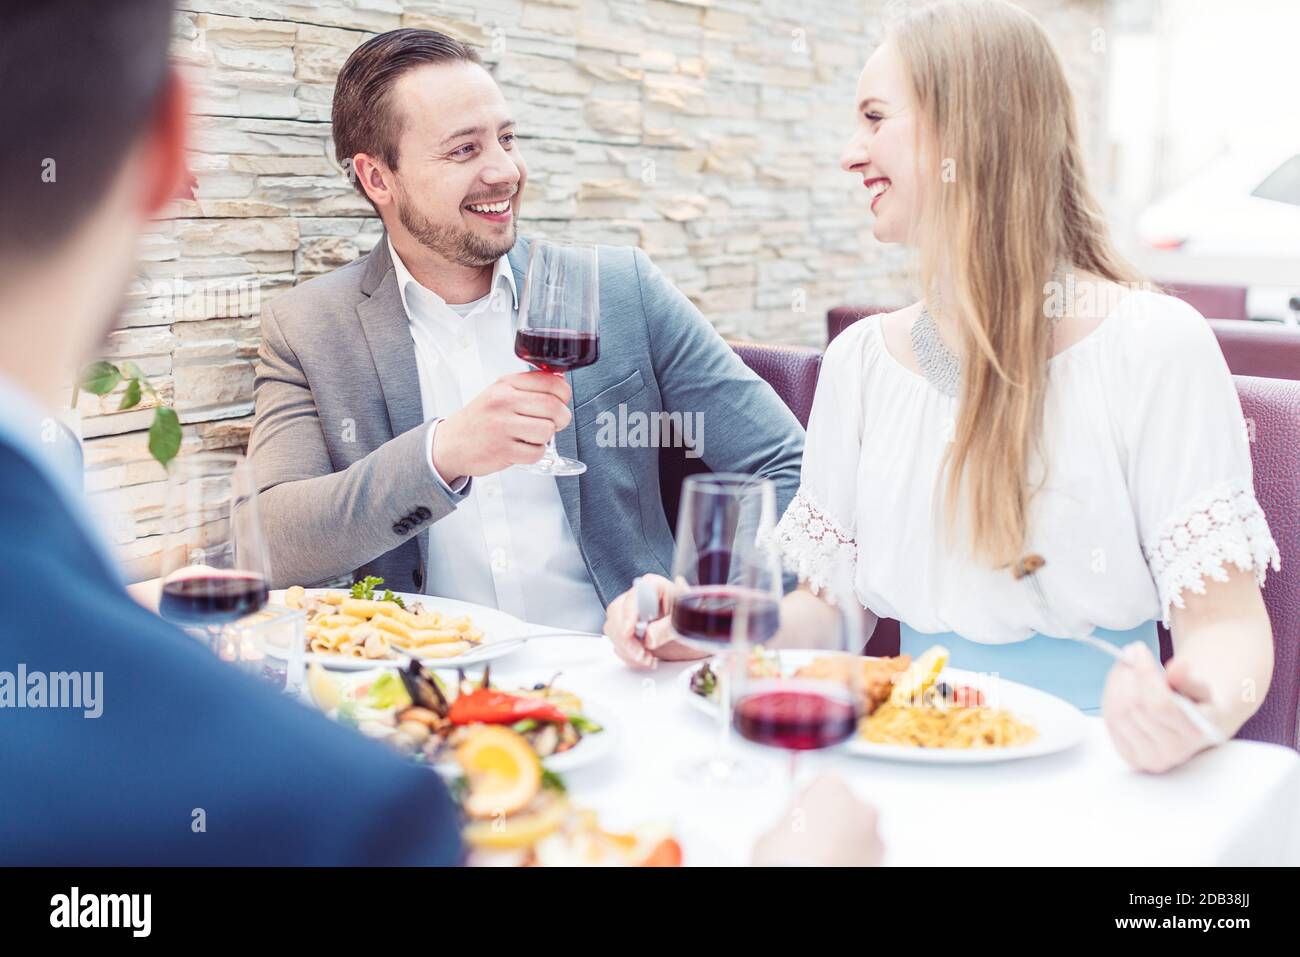 People in an Italian restaurant drinking wine and eating pasta in cheerful and happy mood Stock Photo